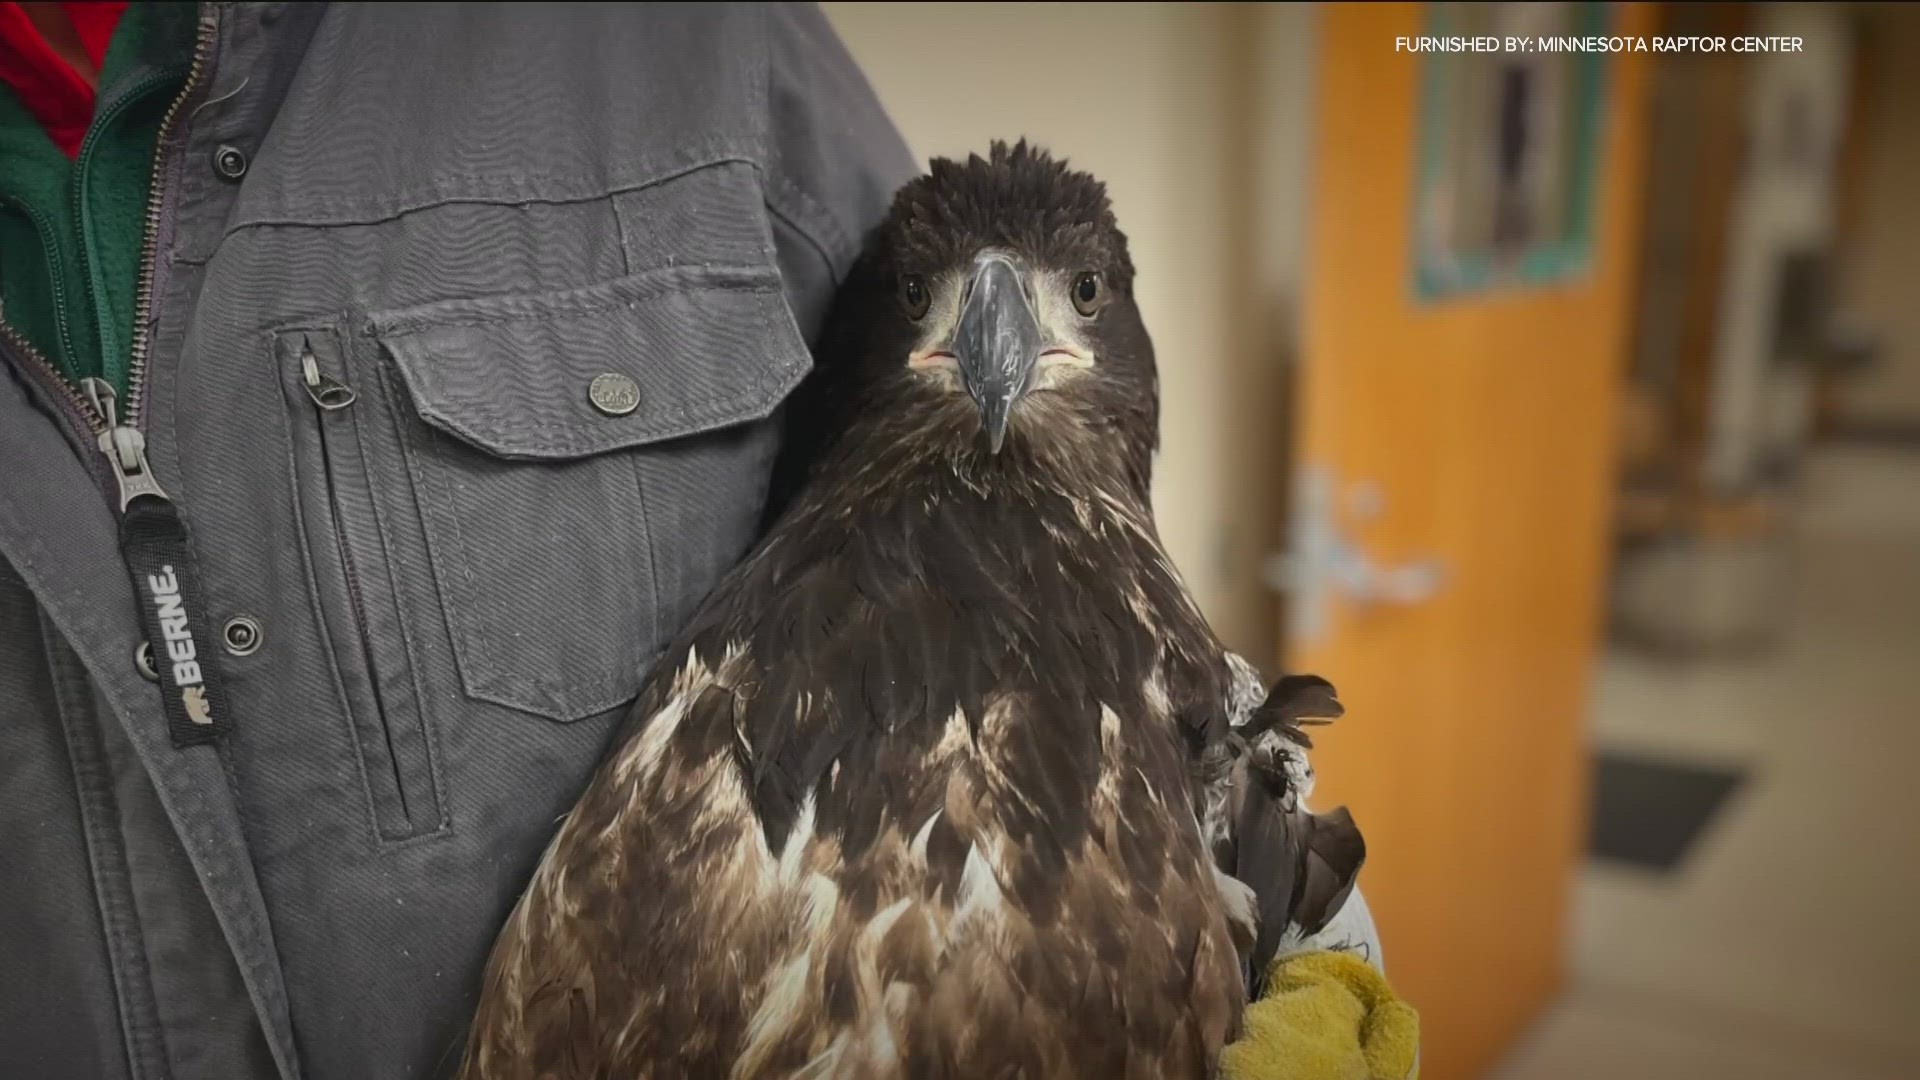 The University of Minnesota's Raptor Center is currently waiting to release 11 eagles until more waterways freeze over.